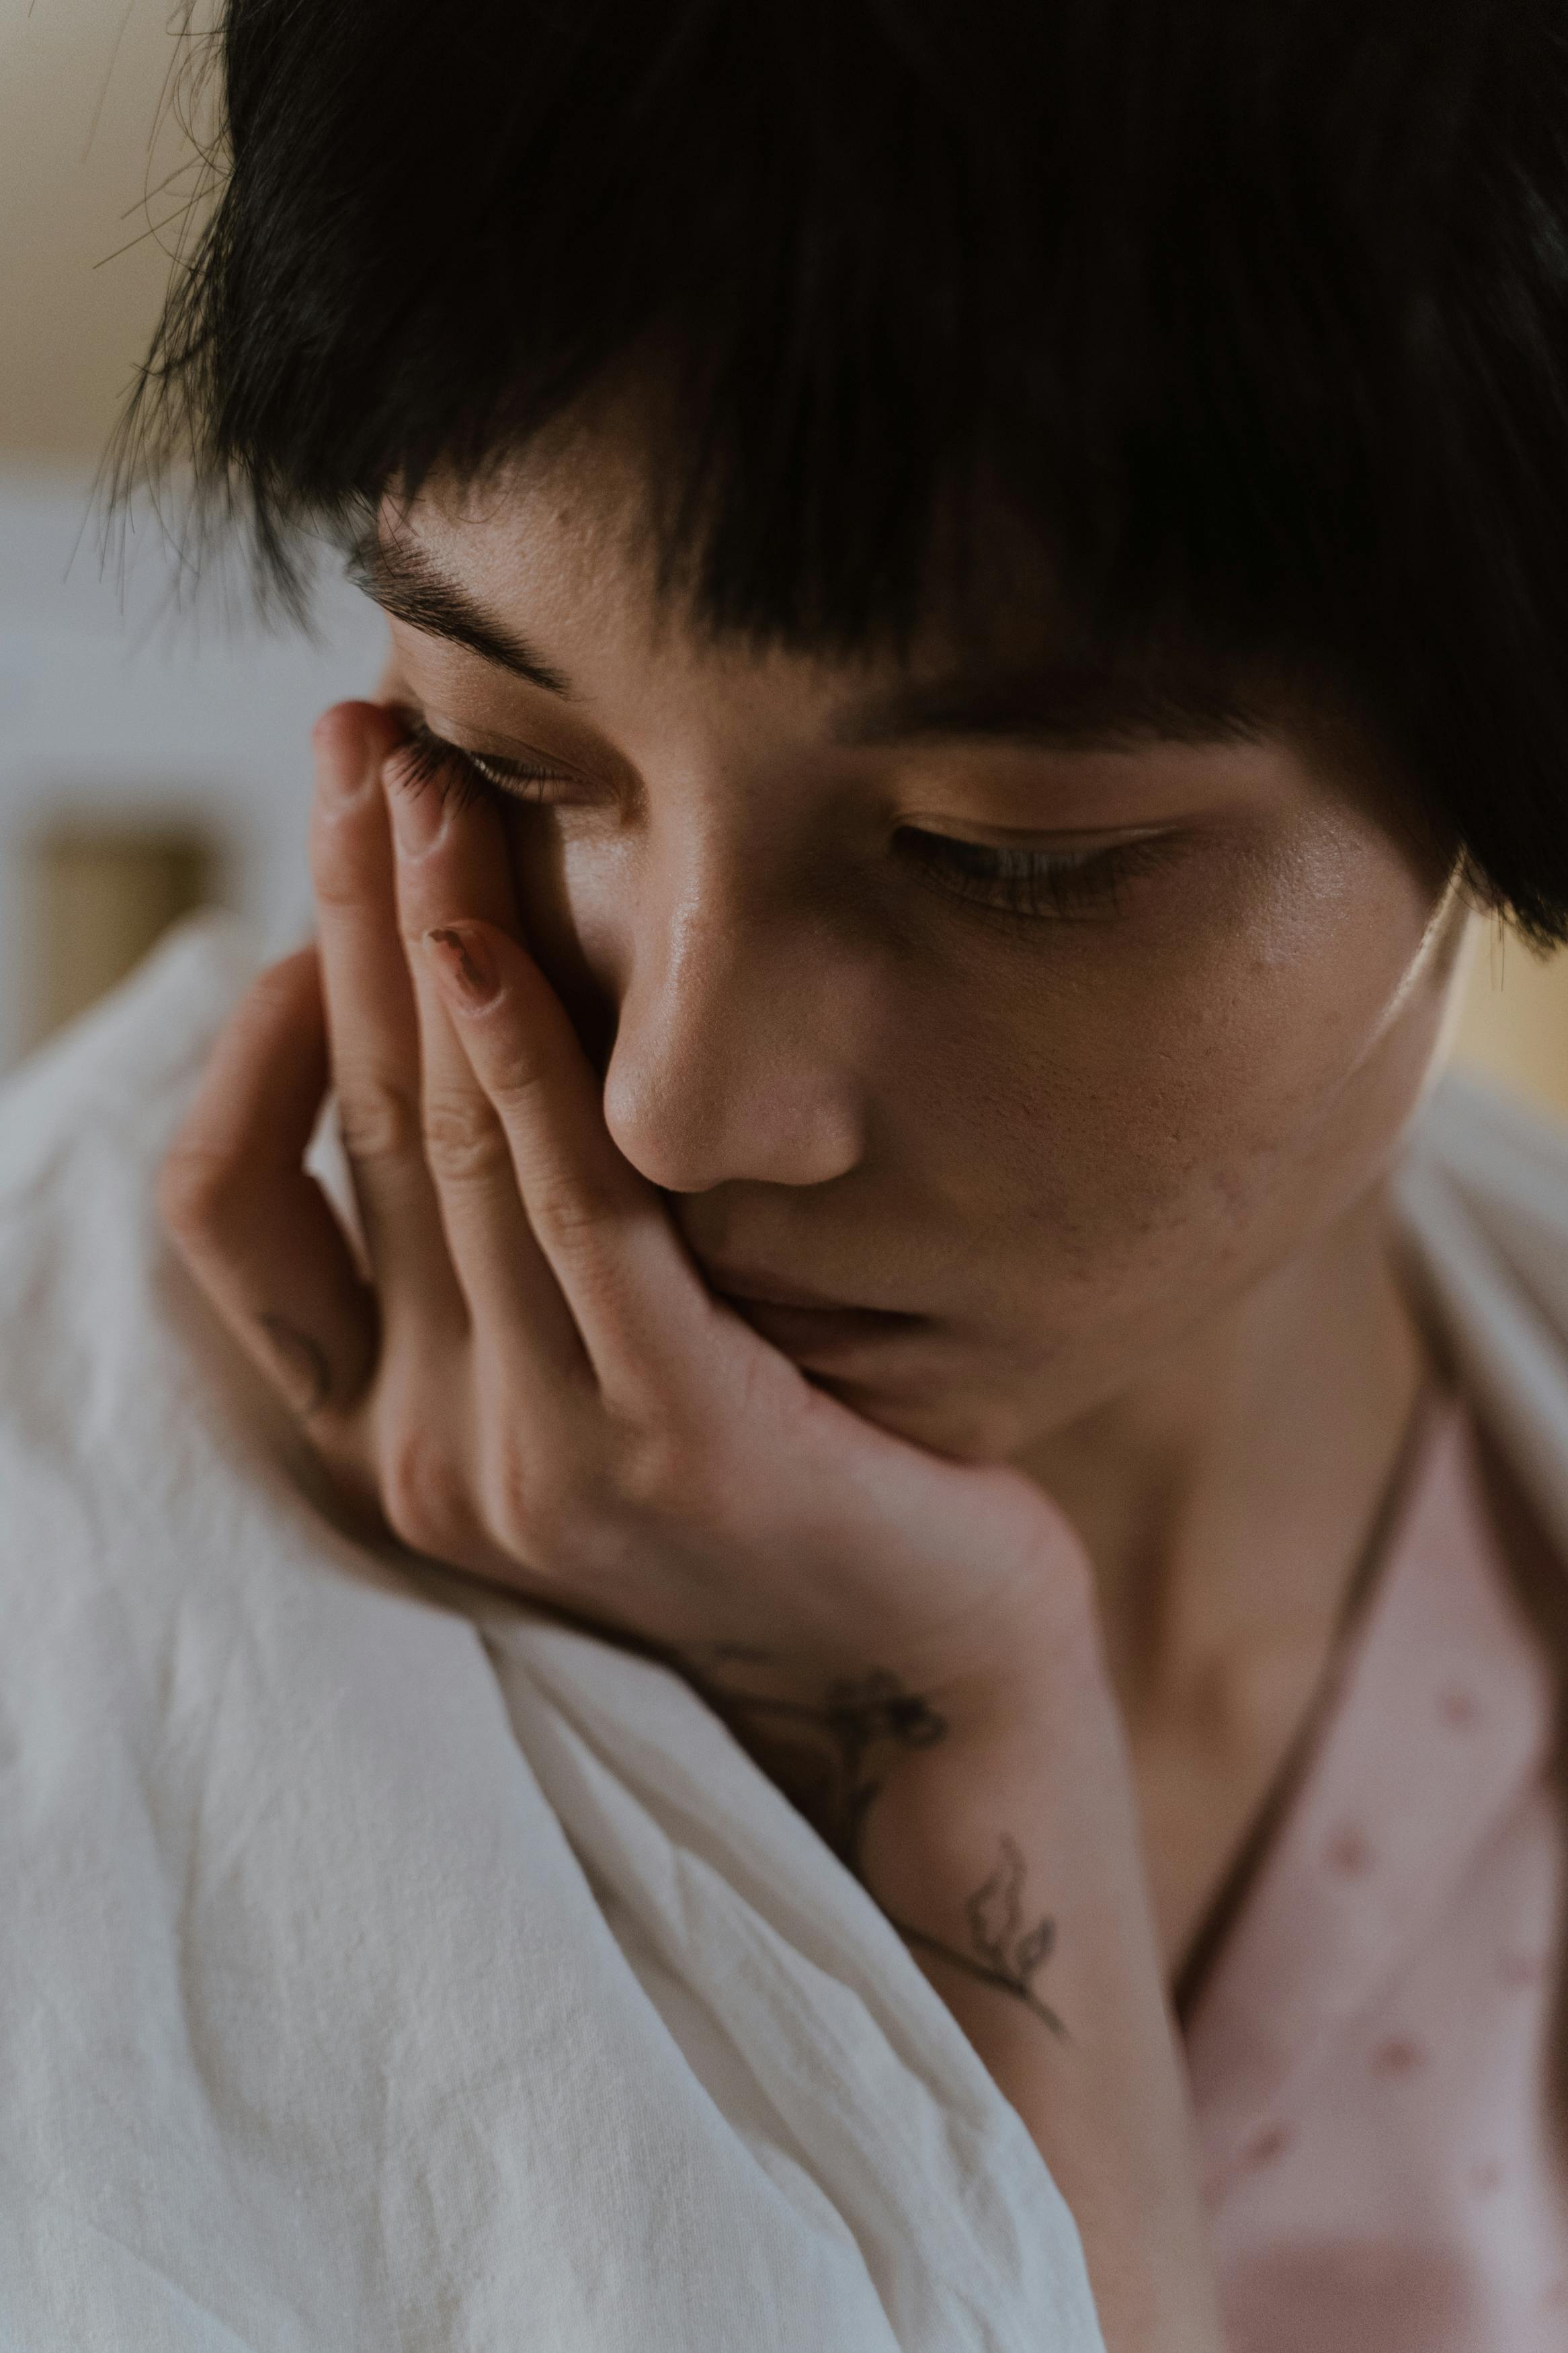 A woman wiping her tears | Source: Pexels